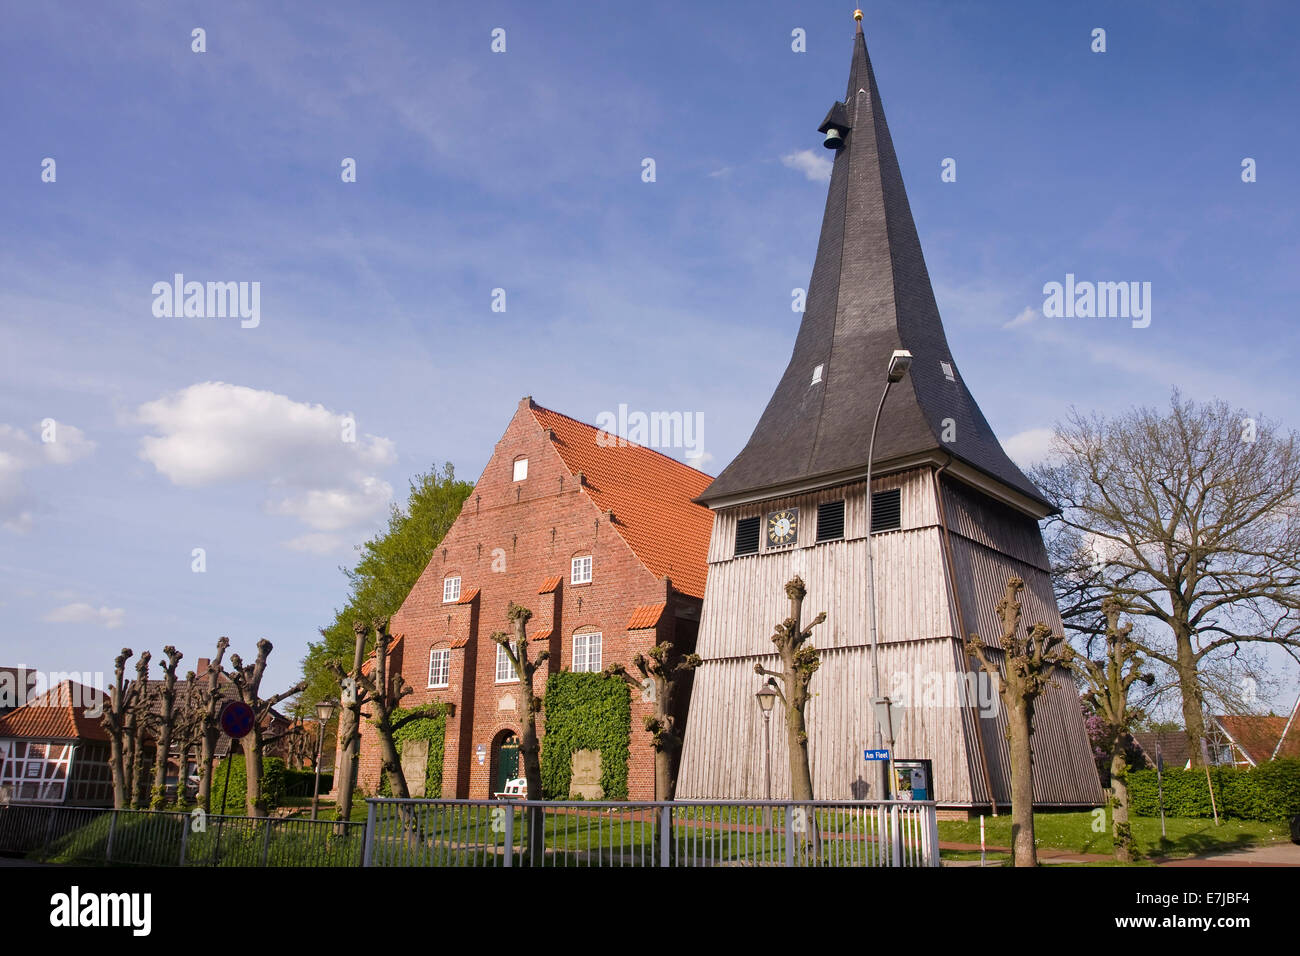 Old land, country, Europe, outside, building, FRG, federal republic, Christianity, Christian, Germany, Europe, historical, churc Stock Photo